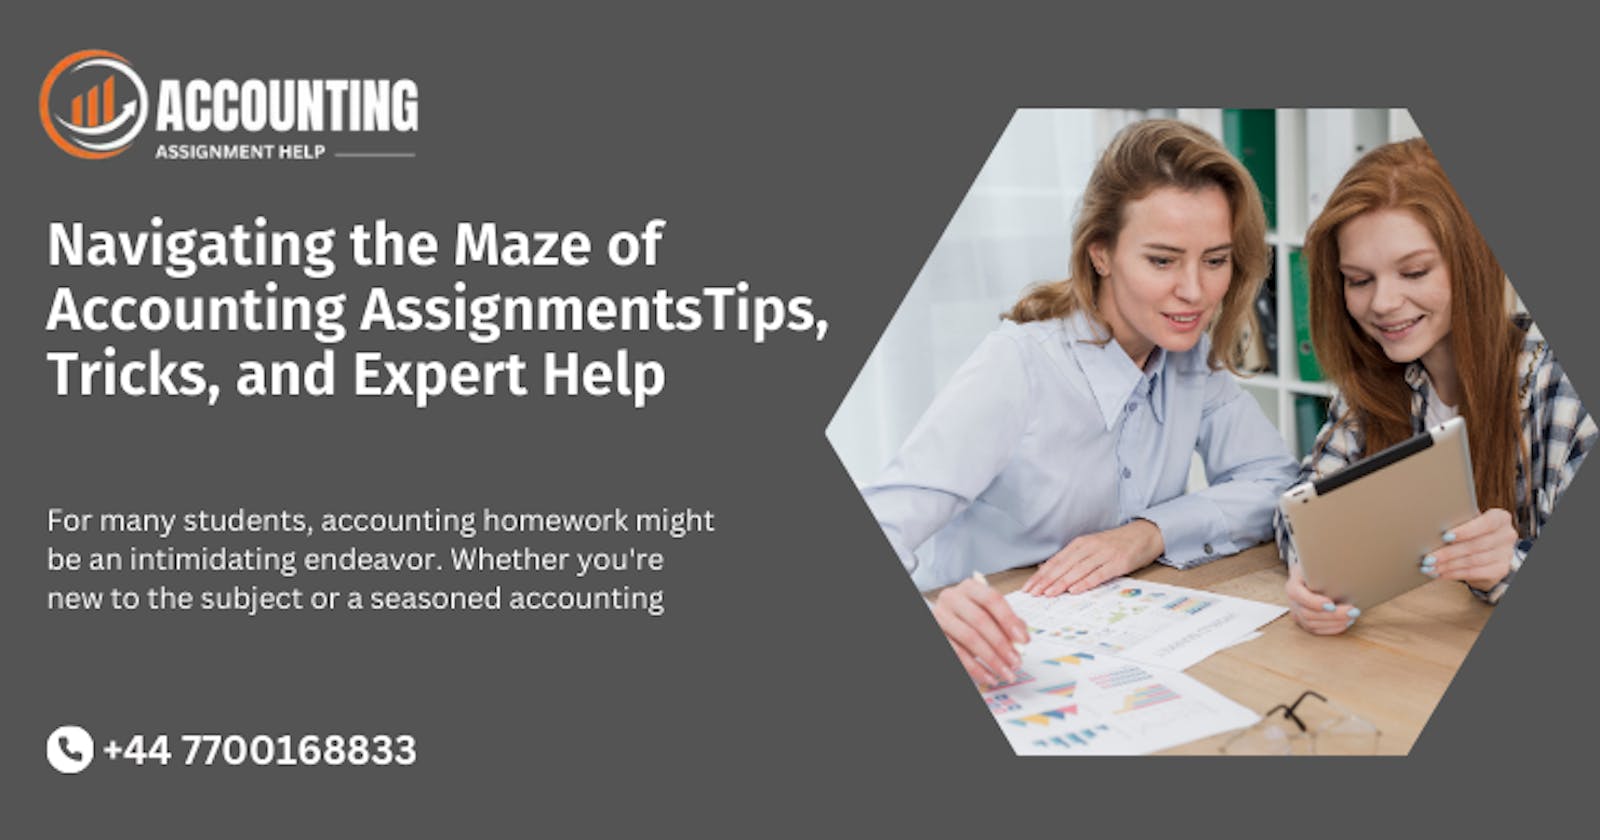 Navigating the Maze of Accounting Assignments Tips, Tricks, and Expert Help